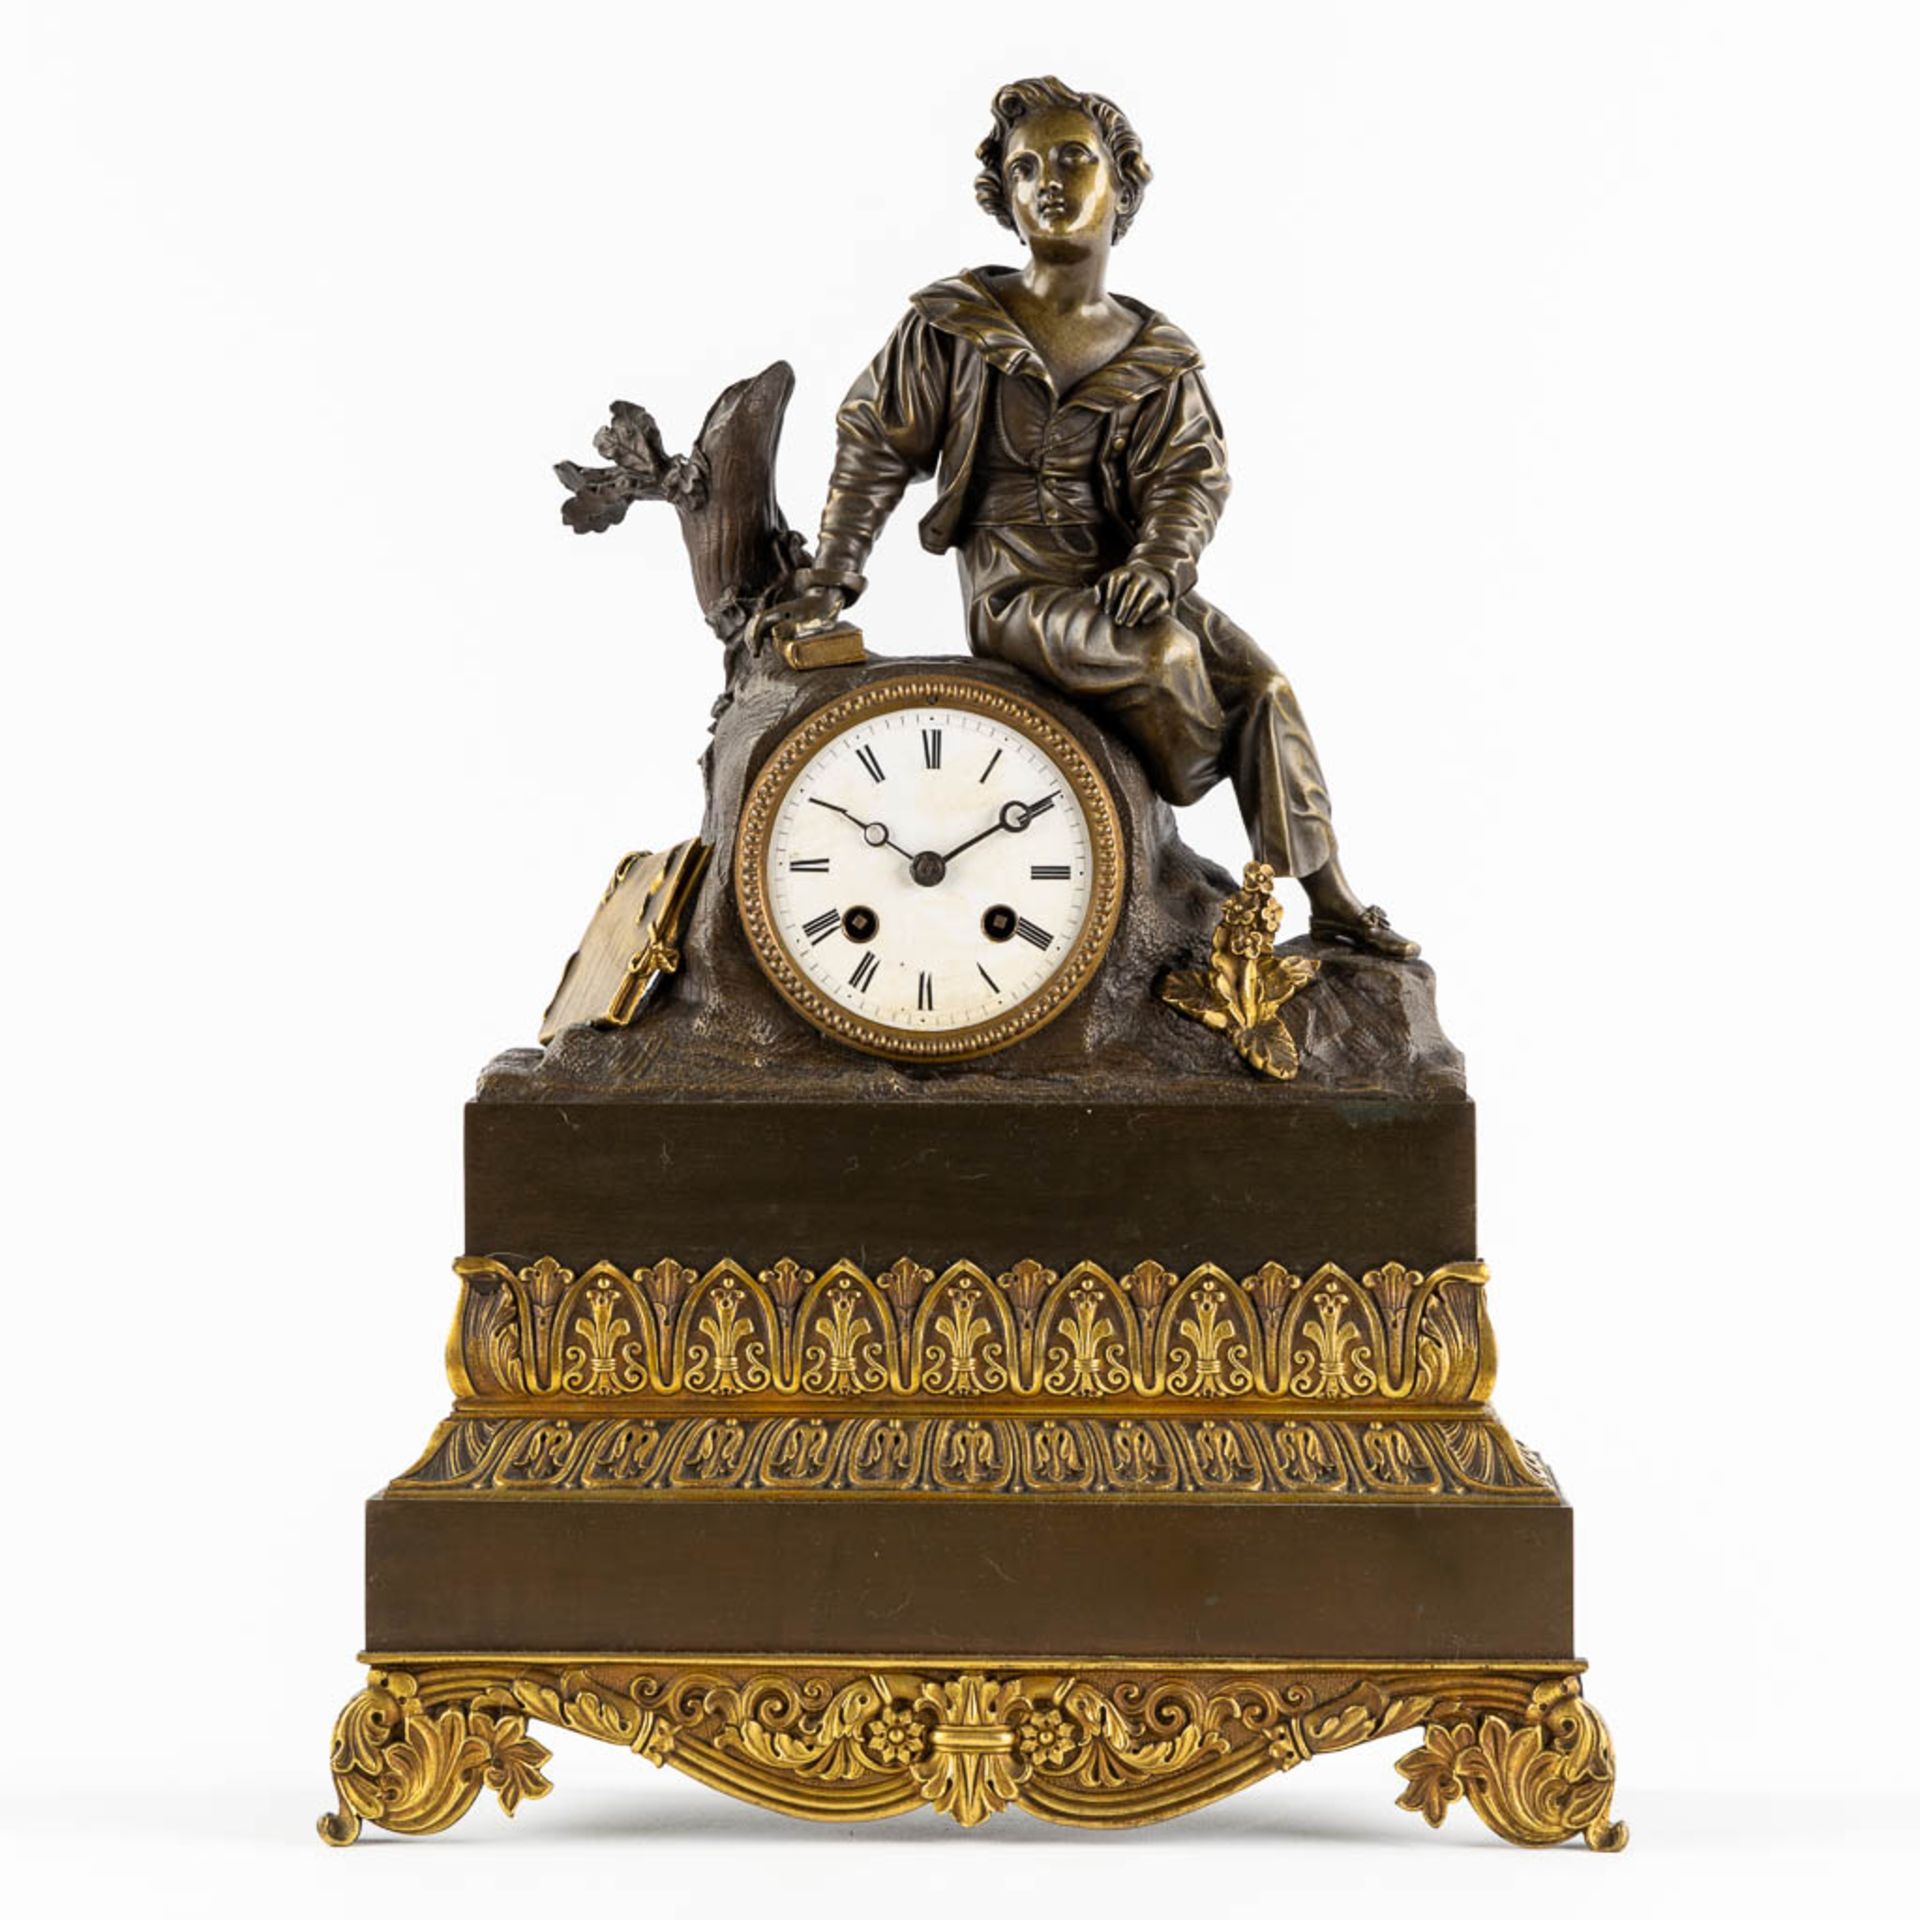 A mantle clock, gilt and patinated bronze, Empire style. 19th C. (L:13 x W:34 x H:46 cm)